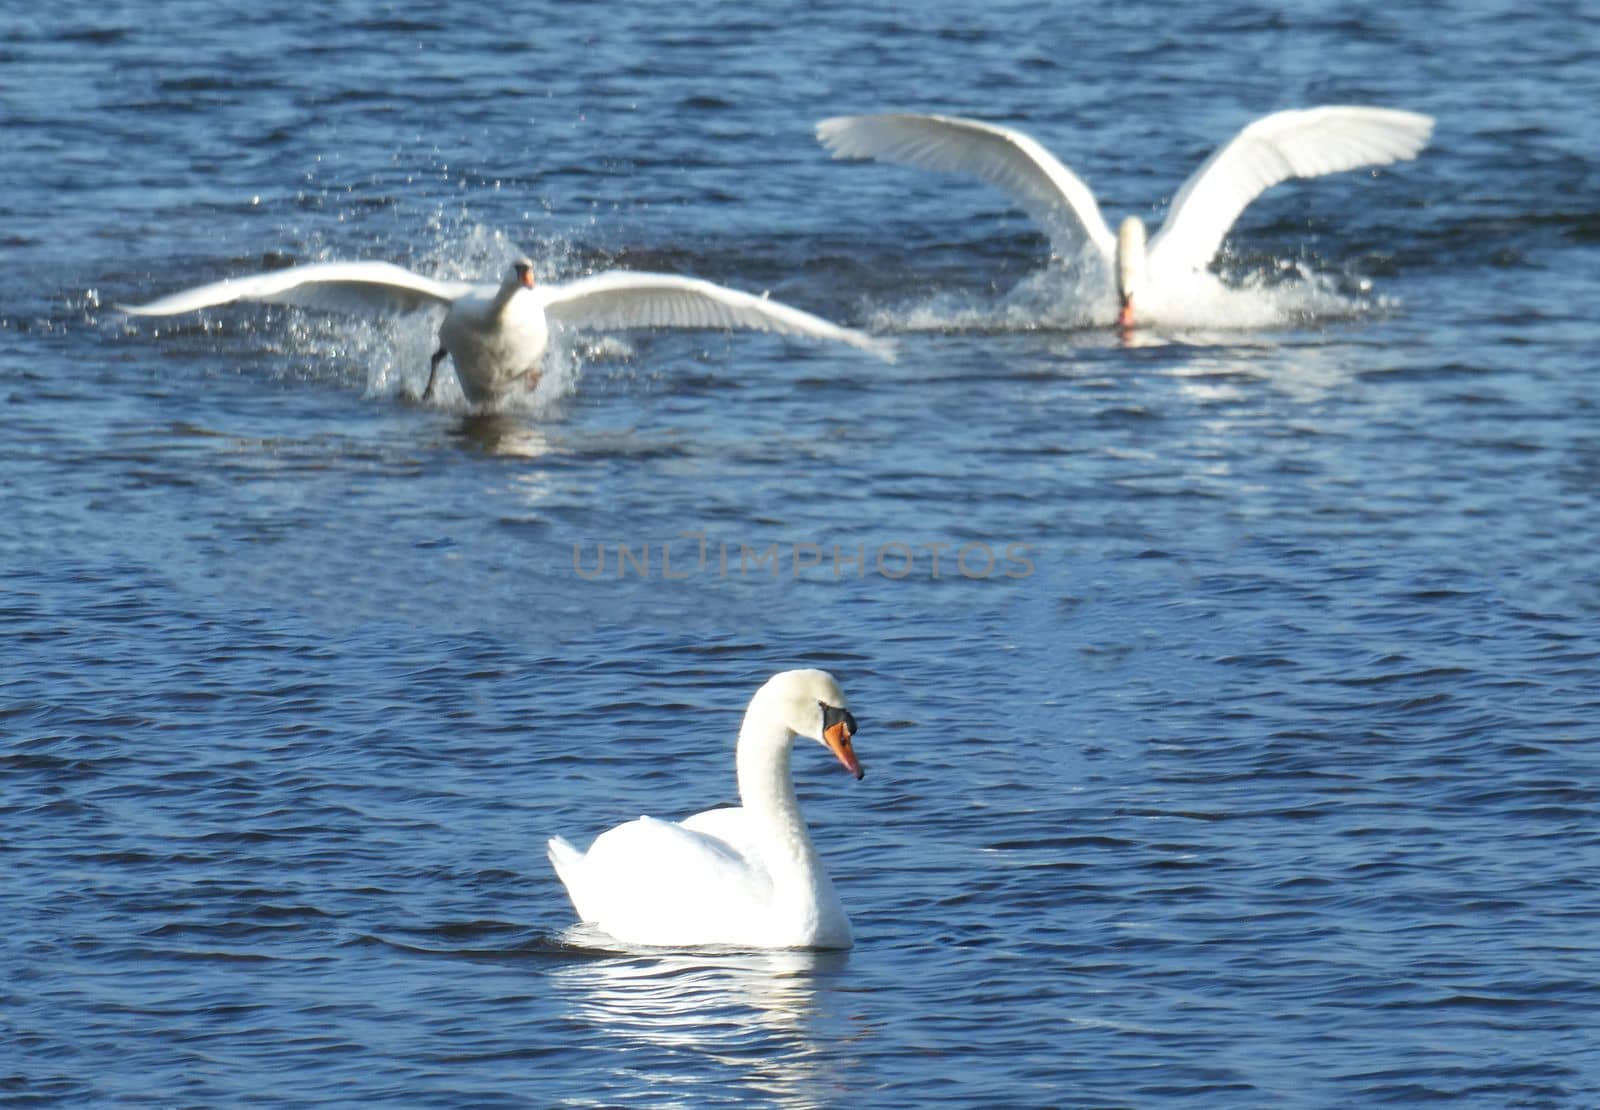 Three male mute swans in one pond is two too many. When we came back after a week there was only one swan left